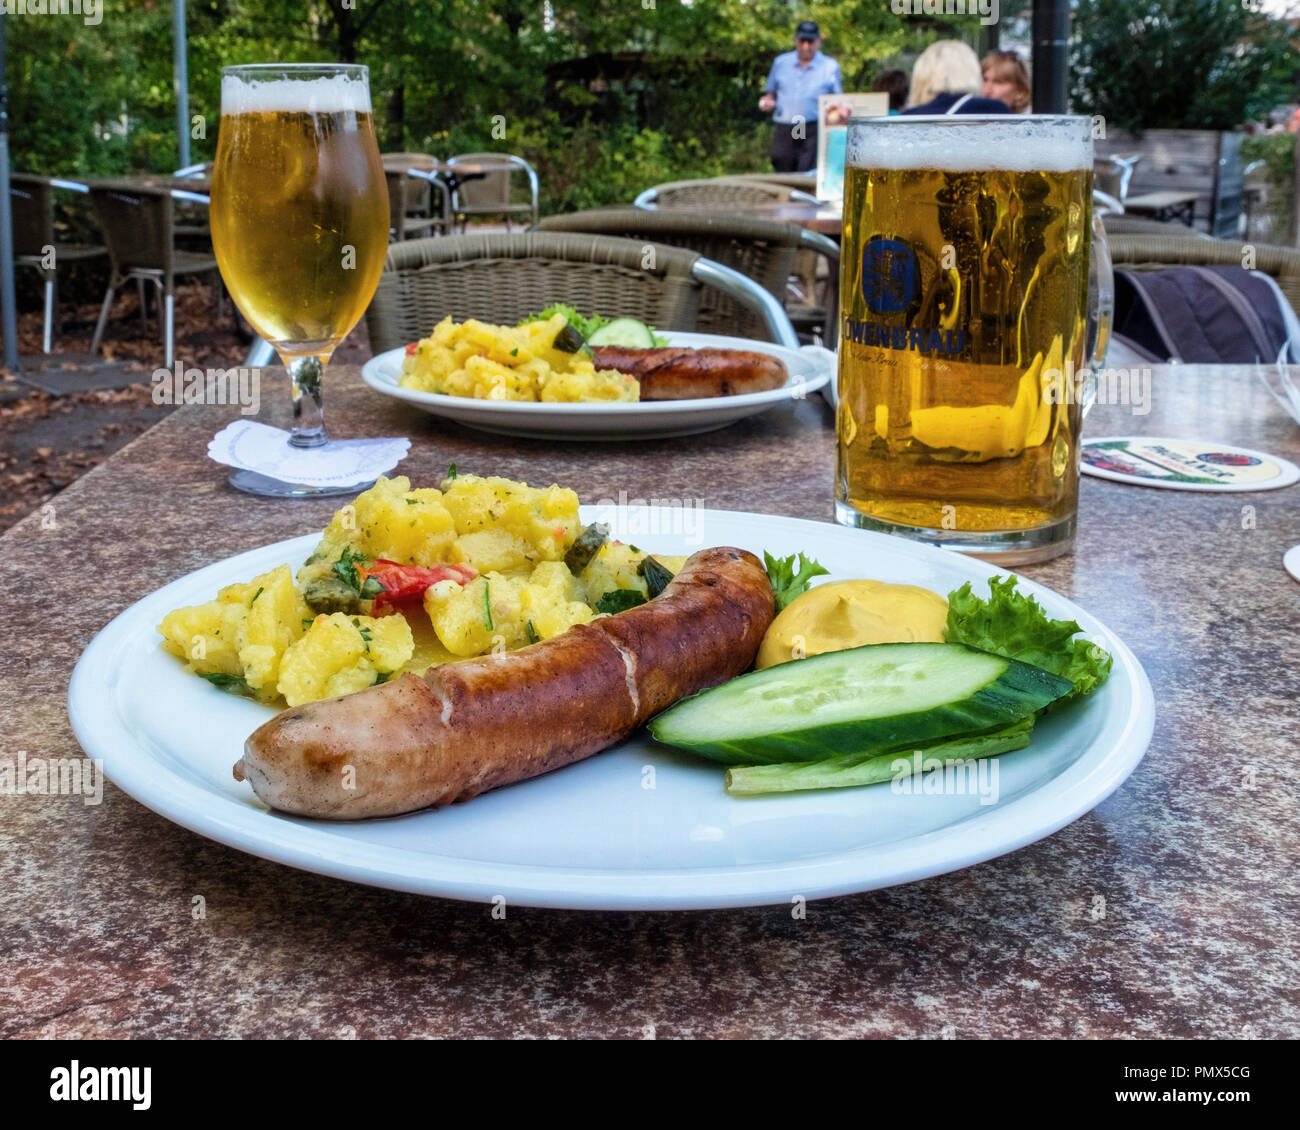 Berlin, Neukölln, Britzer Garden. Sausage, potato salad & mustard meal & beers in glasses on outdoor table of snack bar providing teas & lunches Stock Photo